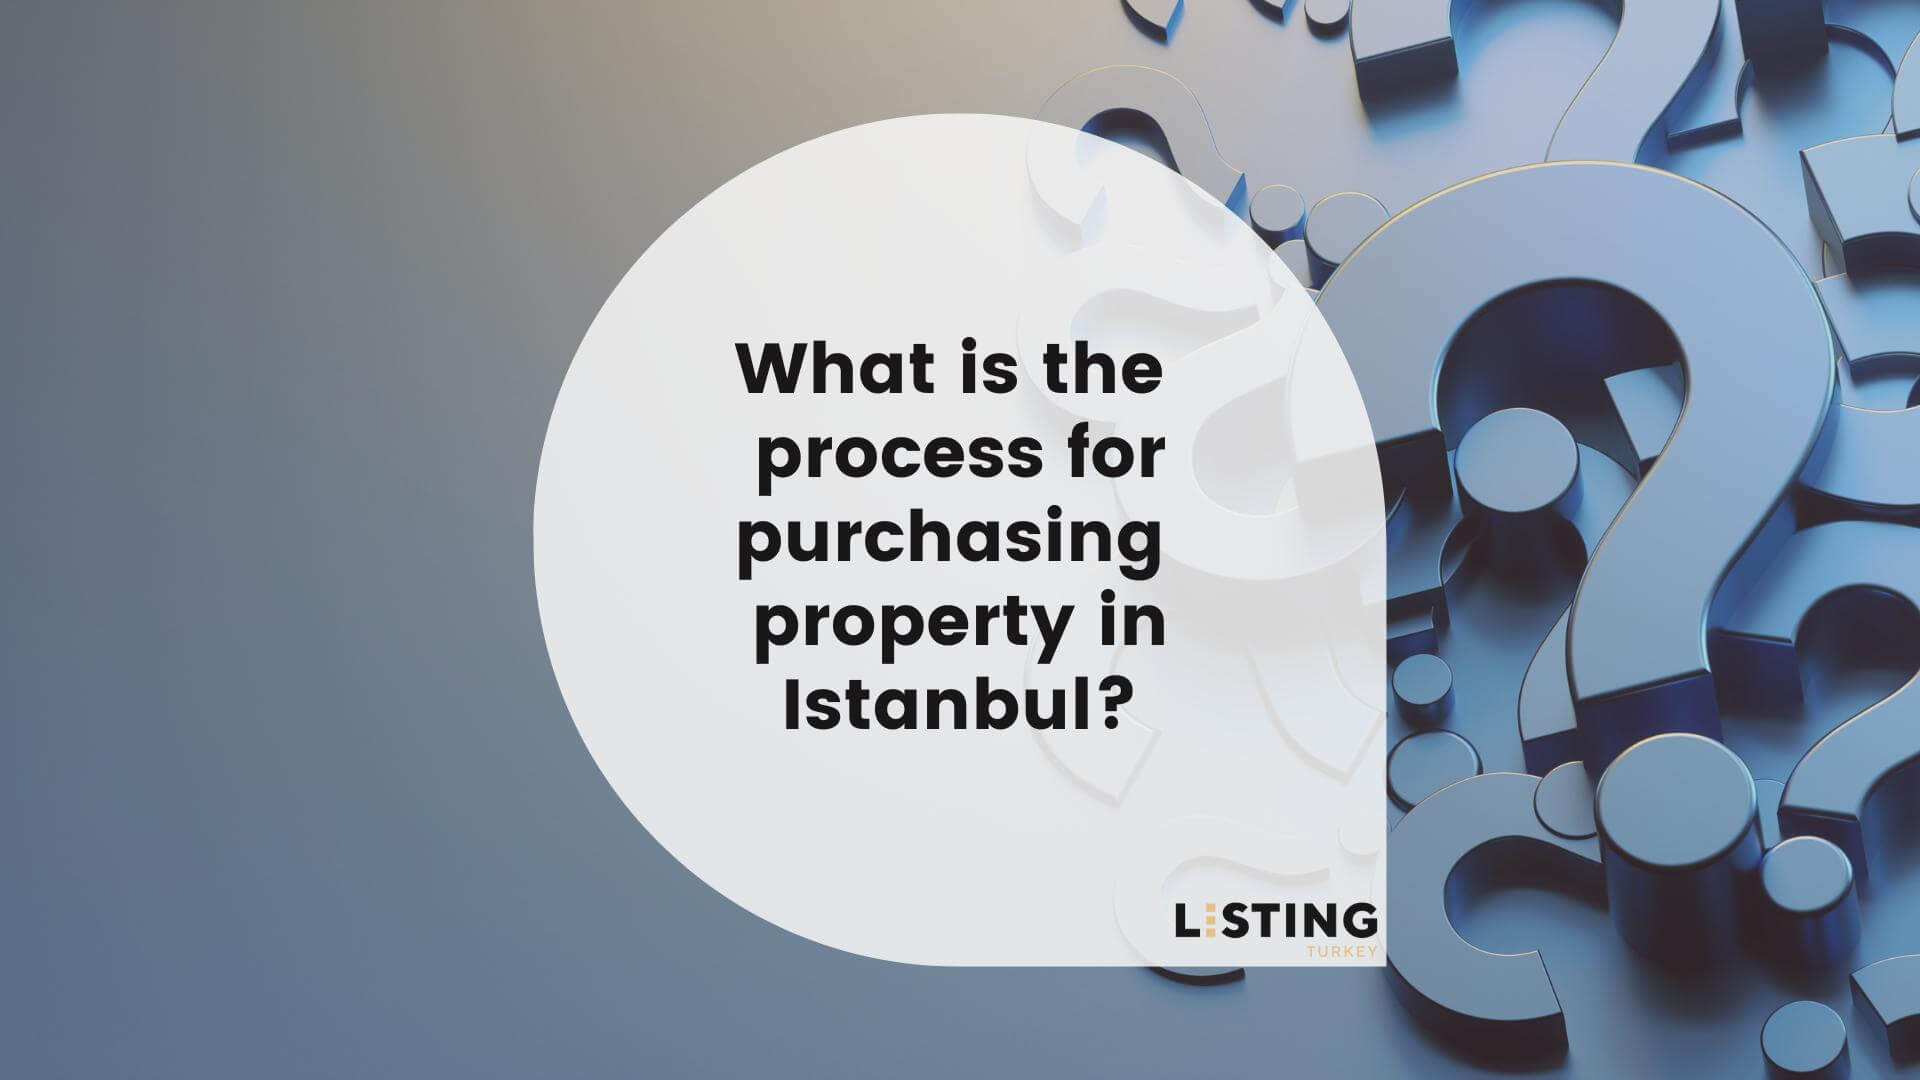 What is the process for purchasing property in Istanbul